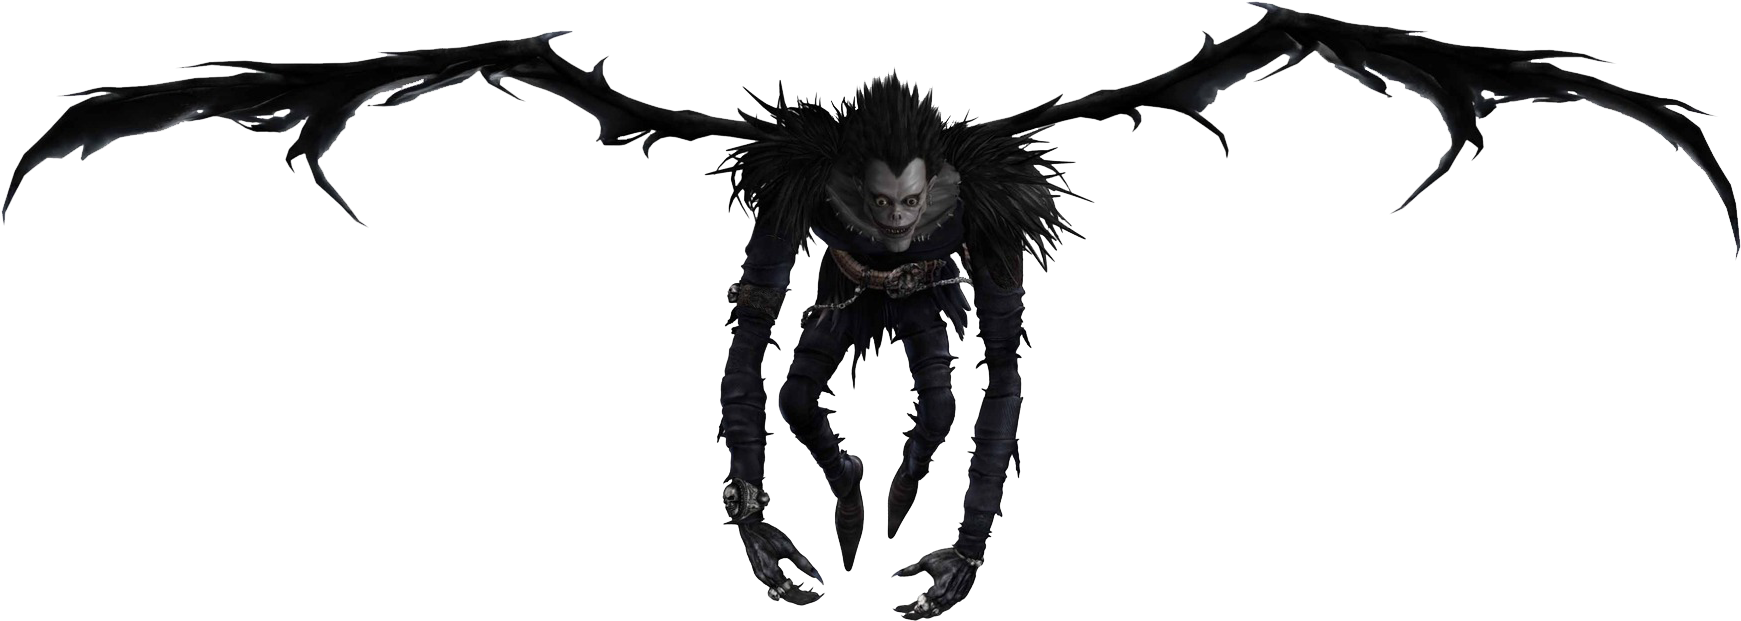 Death Note png images